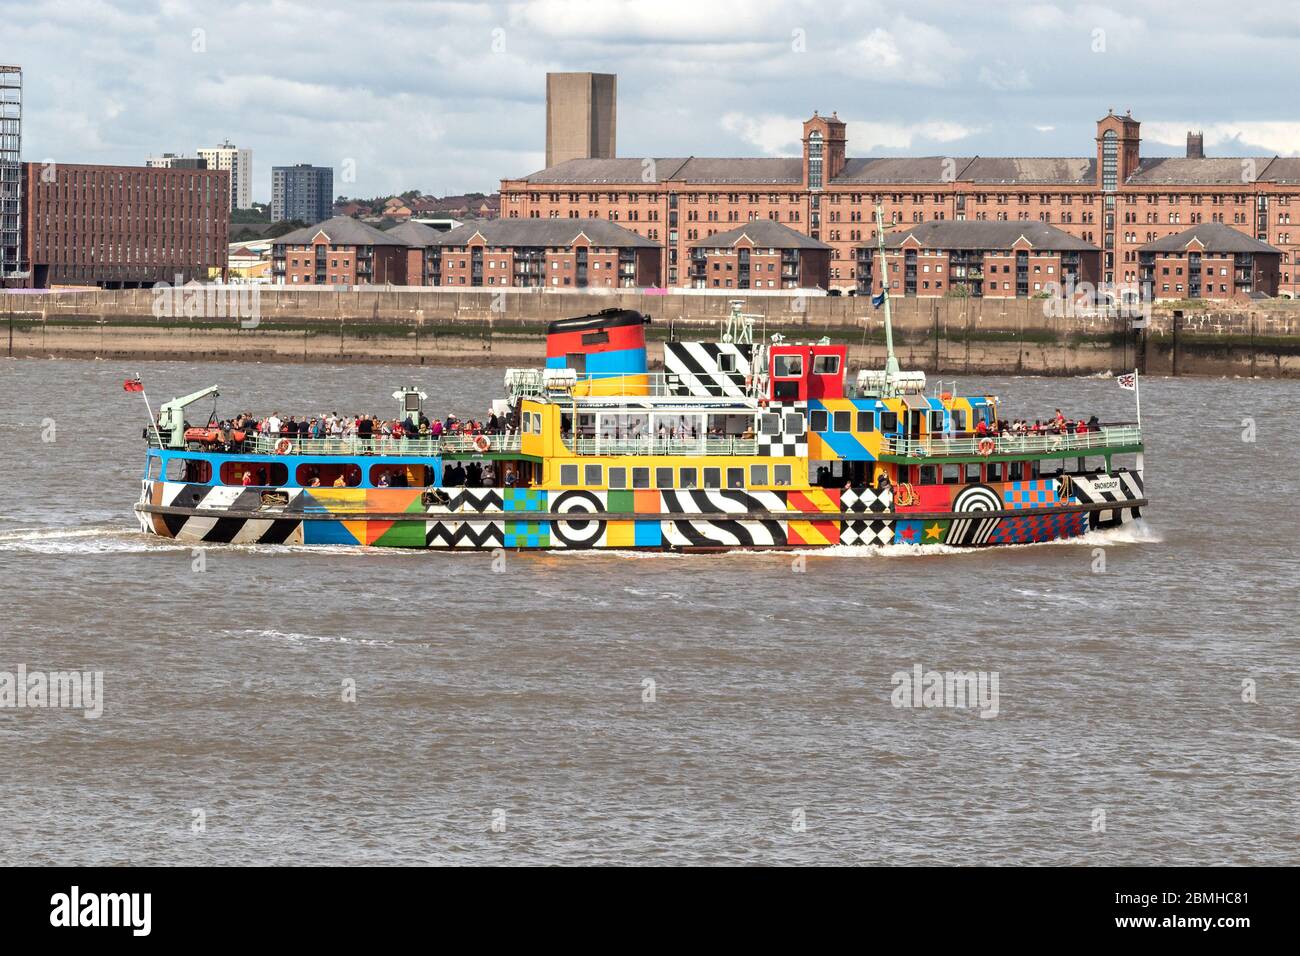 Mersey river ferry 'Snowdrop' in dazzle livery designed by Sir Peter Blake against Liverpool city skyline. Stock Photo